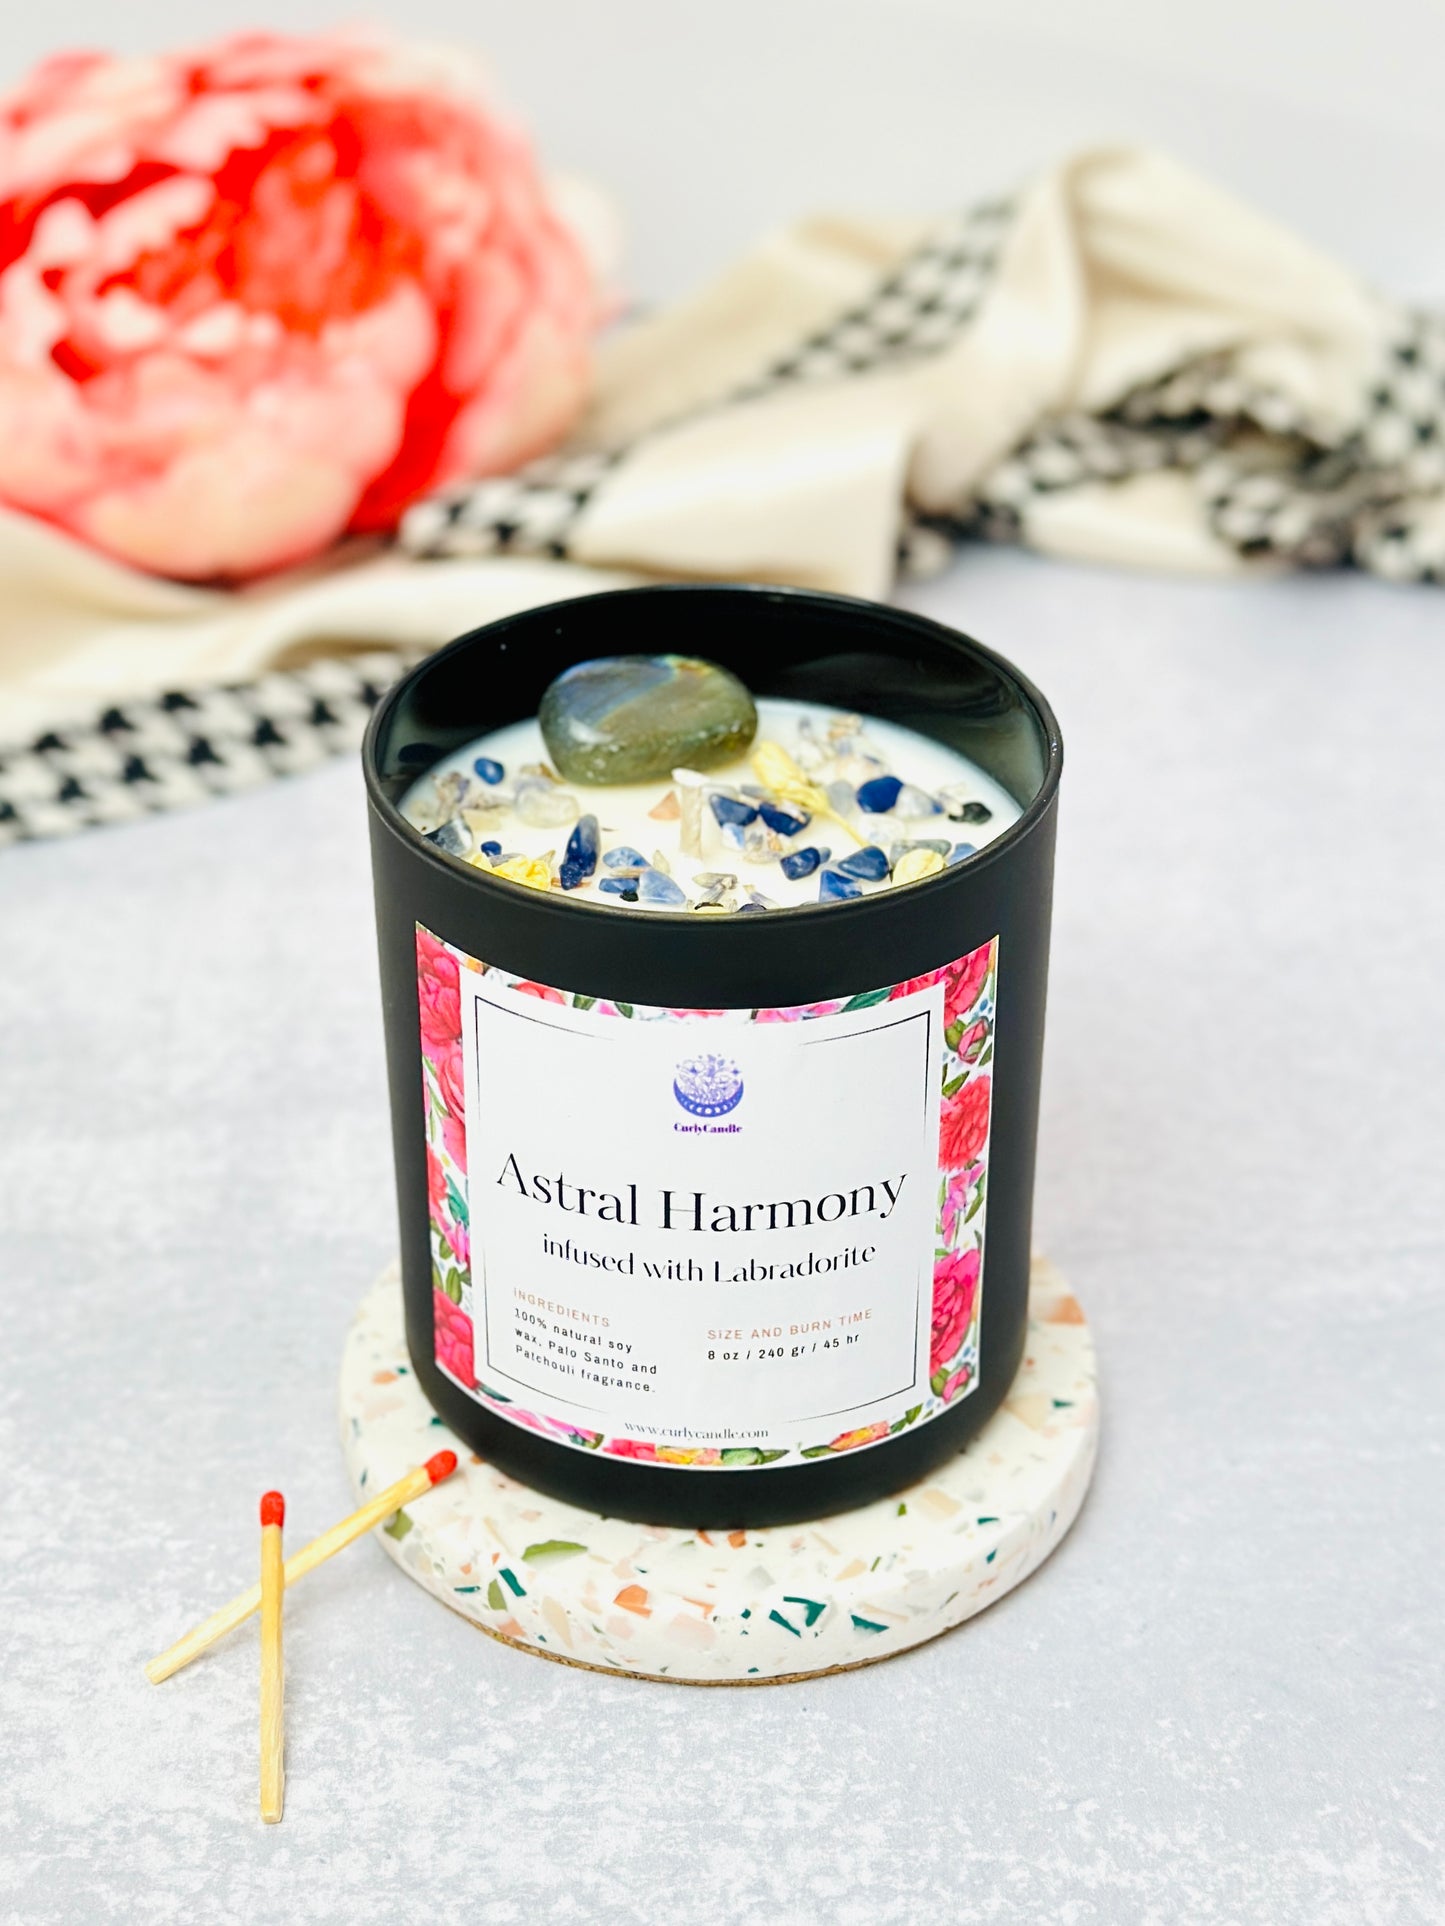 Crystal soy candle with Labradorite  / Astral Harmony manifestation candle